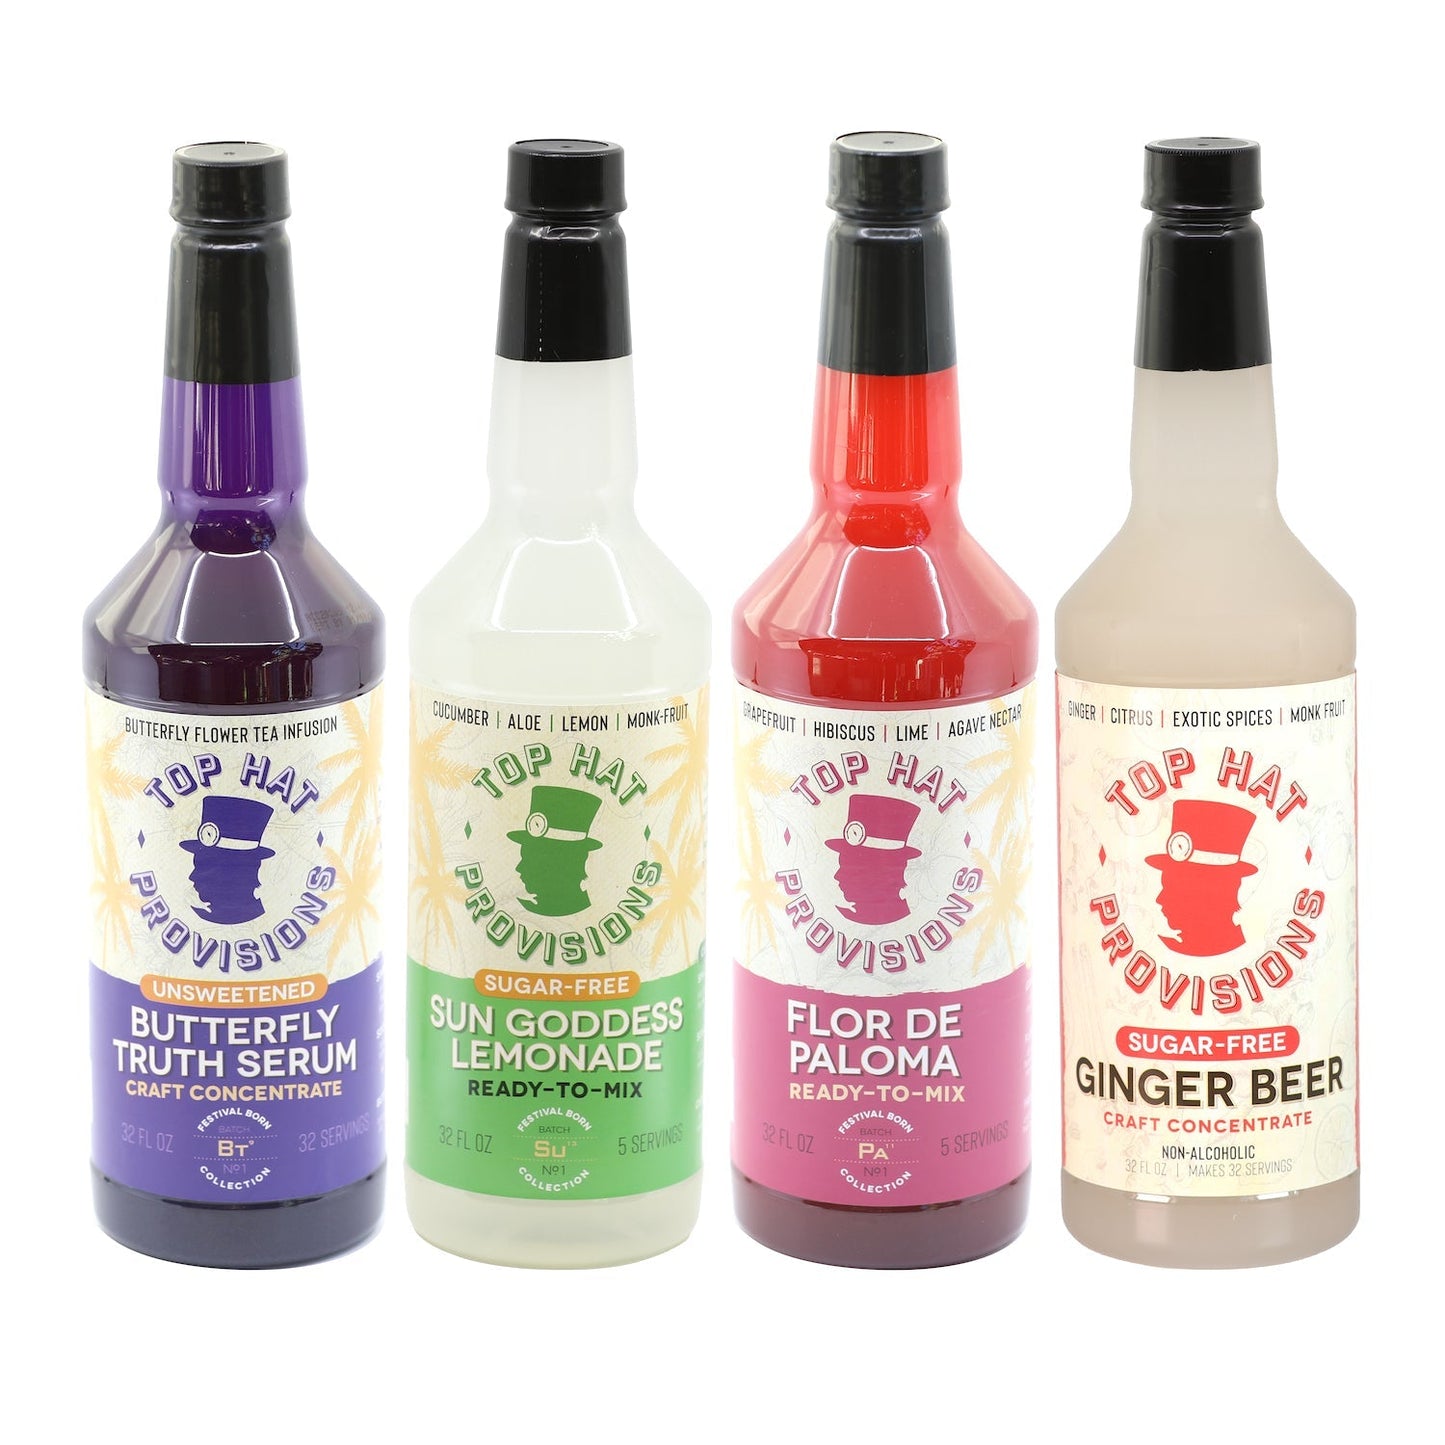 Top Hat Mojave Sister Cocktail Party Combo Kit (4 pack of 32oz bottles) - Groove Rabbit